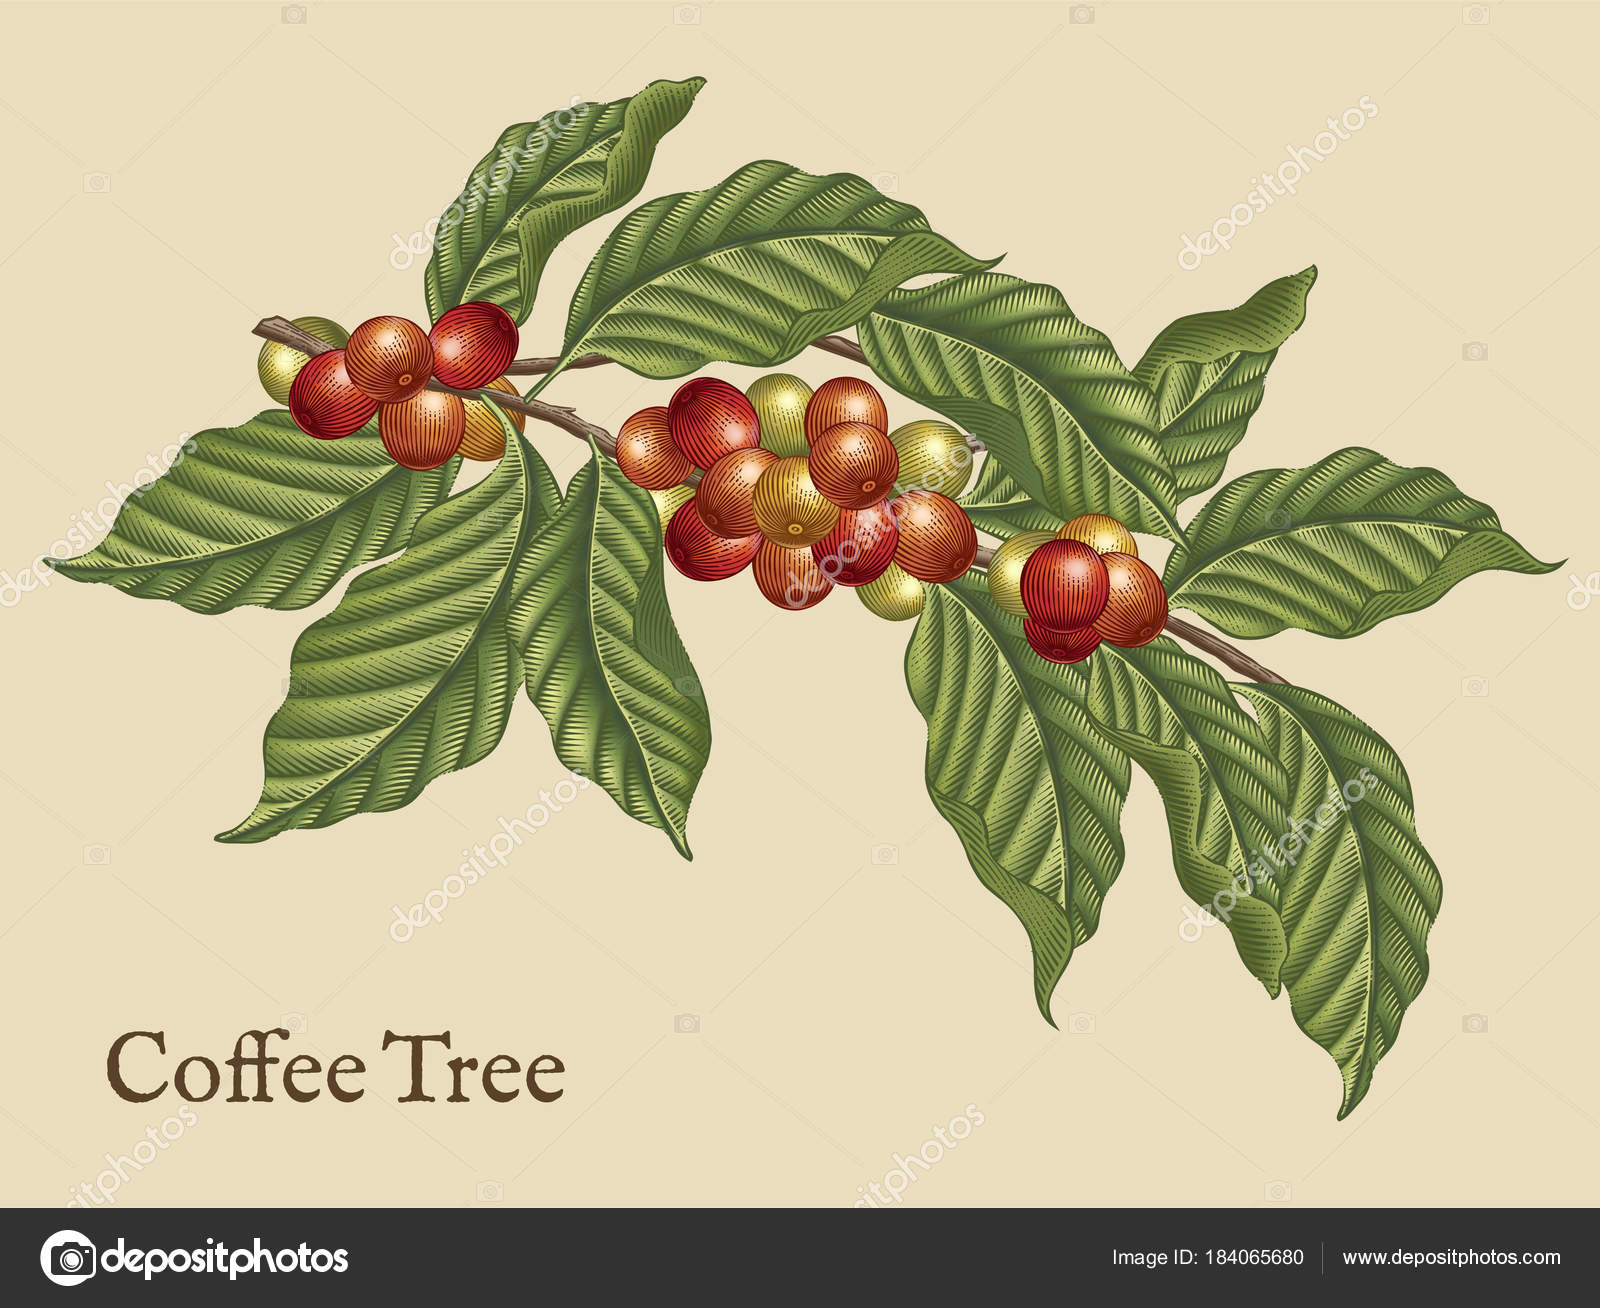 Coffee tree elements Stock by 184065680